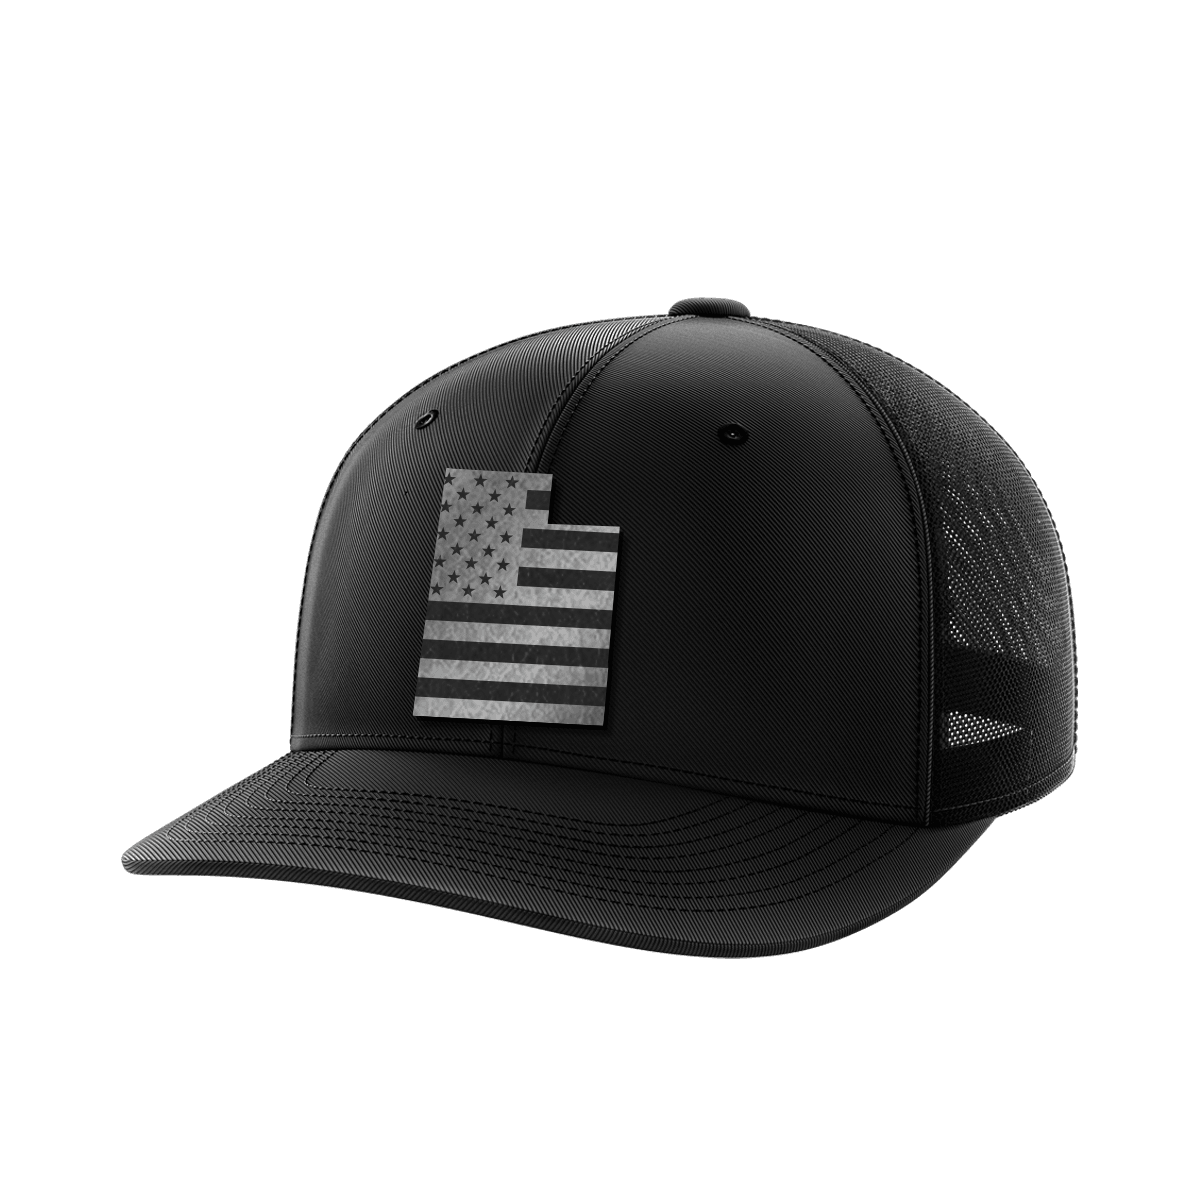 Utah United Collection (black leather) - Greater Half